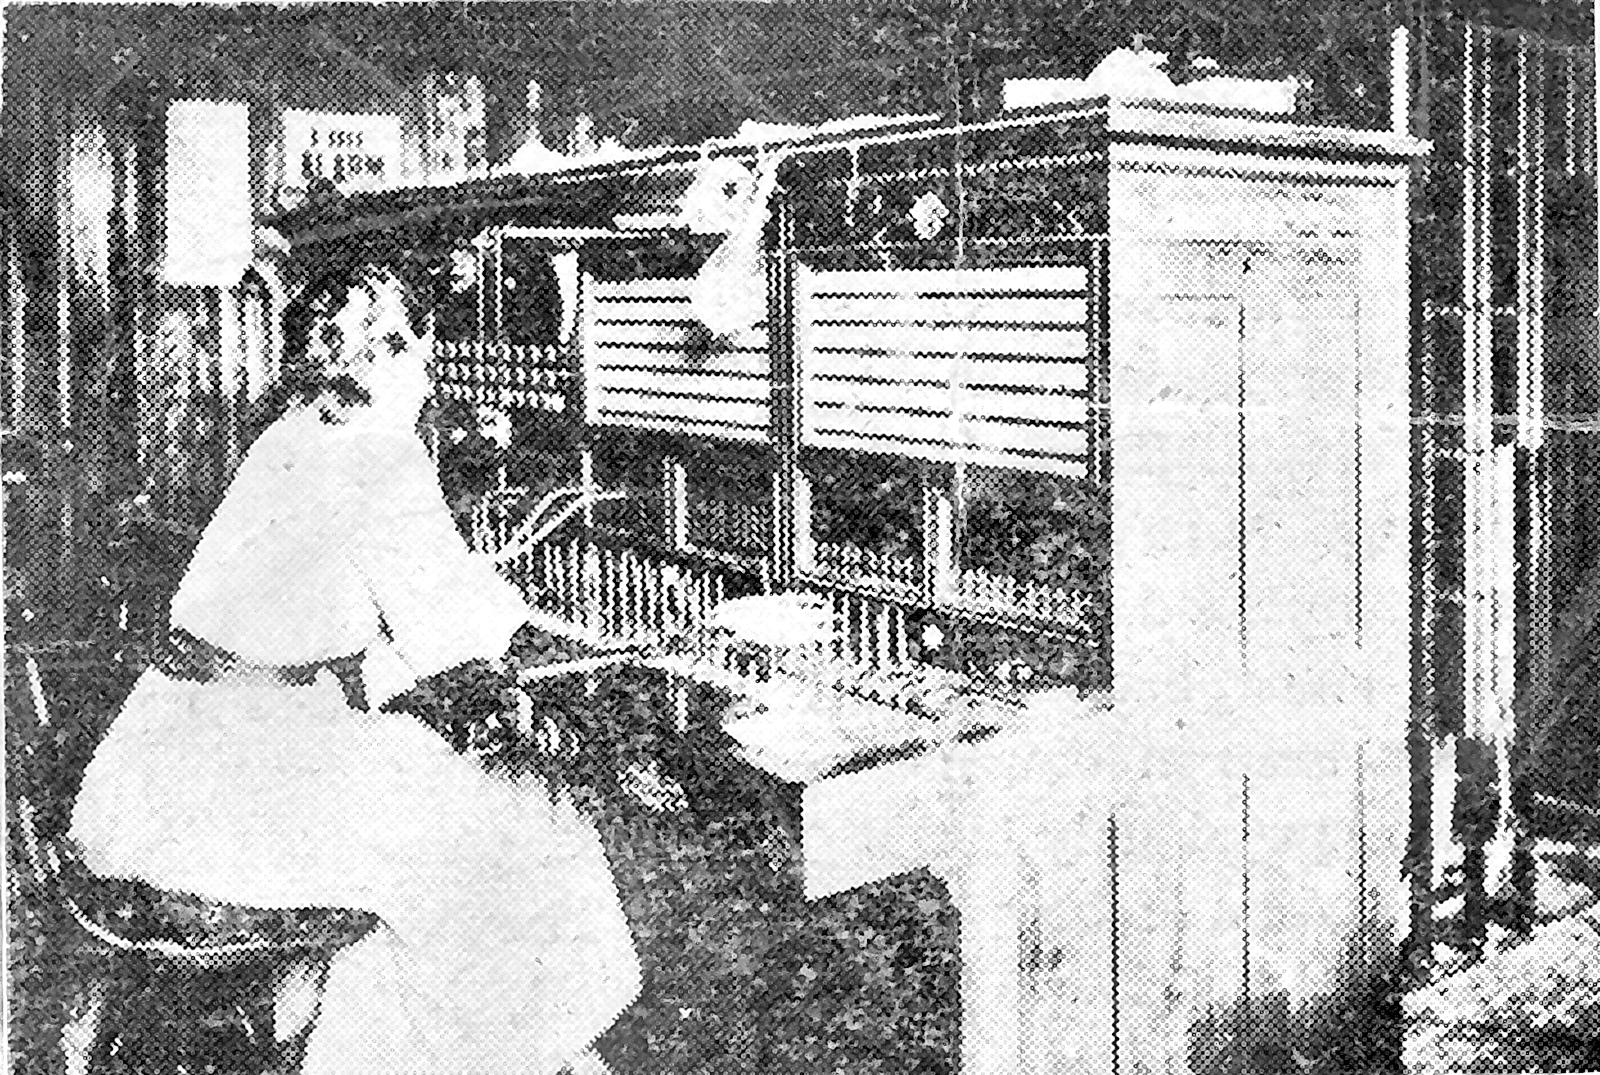 This original 1907 photo of the telephone operator in the Finch building - 47 Main Street